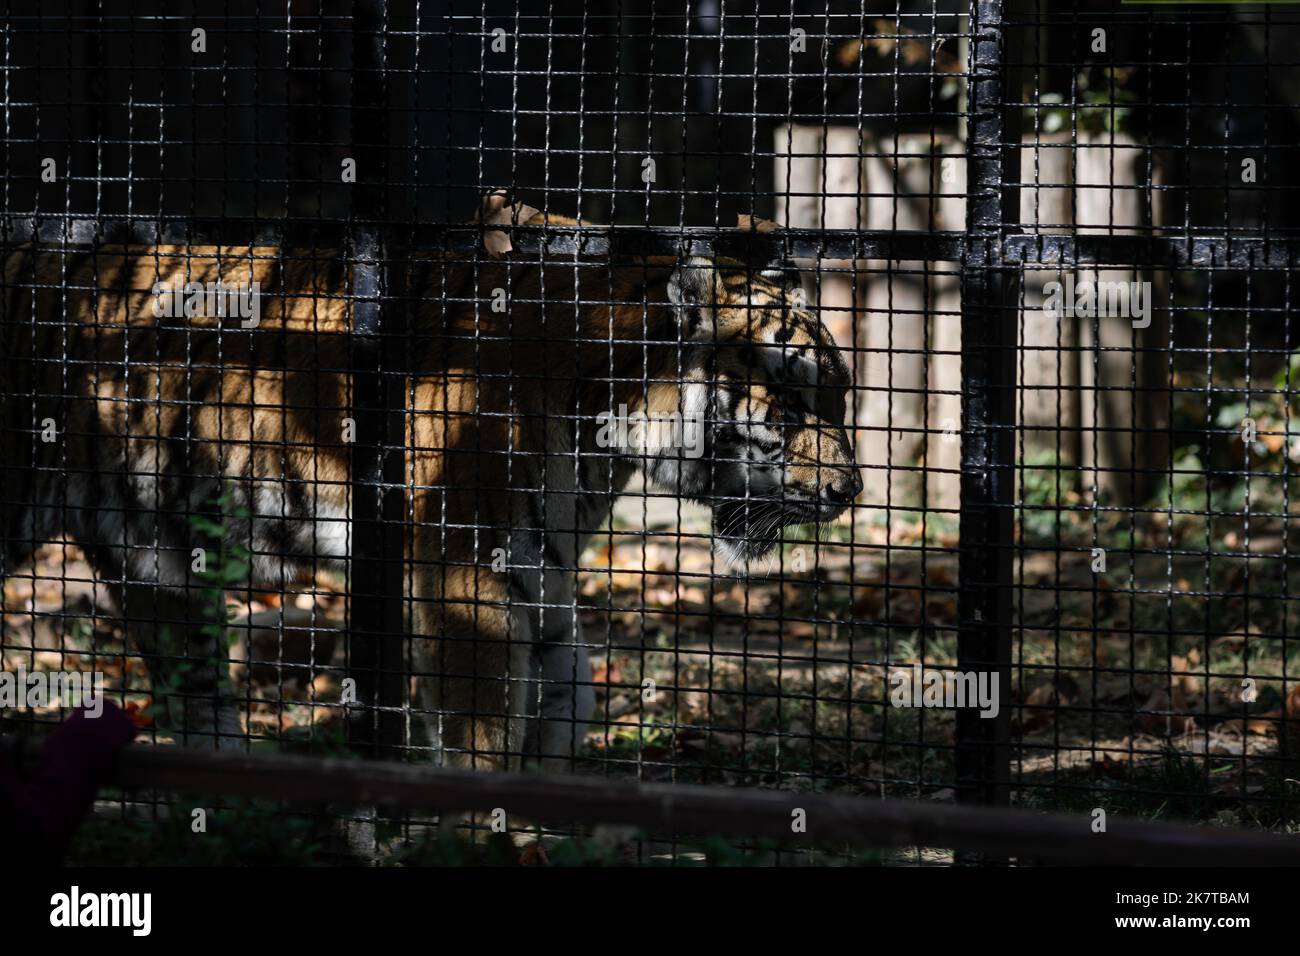 Caged Indian tiger in an eastern European zoo. Caged wildlife. Animal abuse. Stock Photo